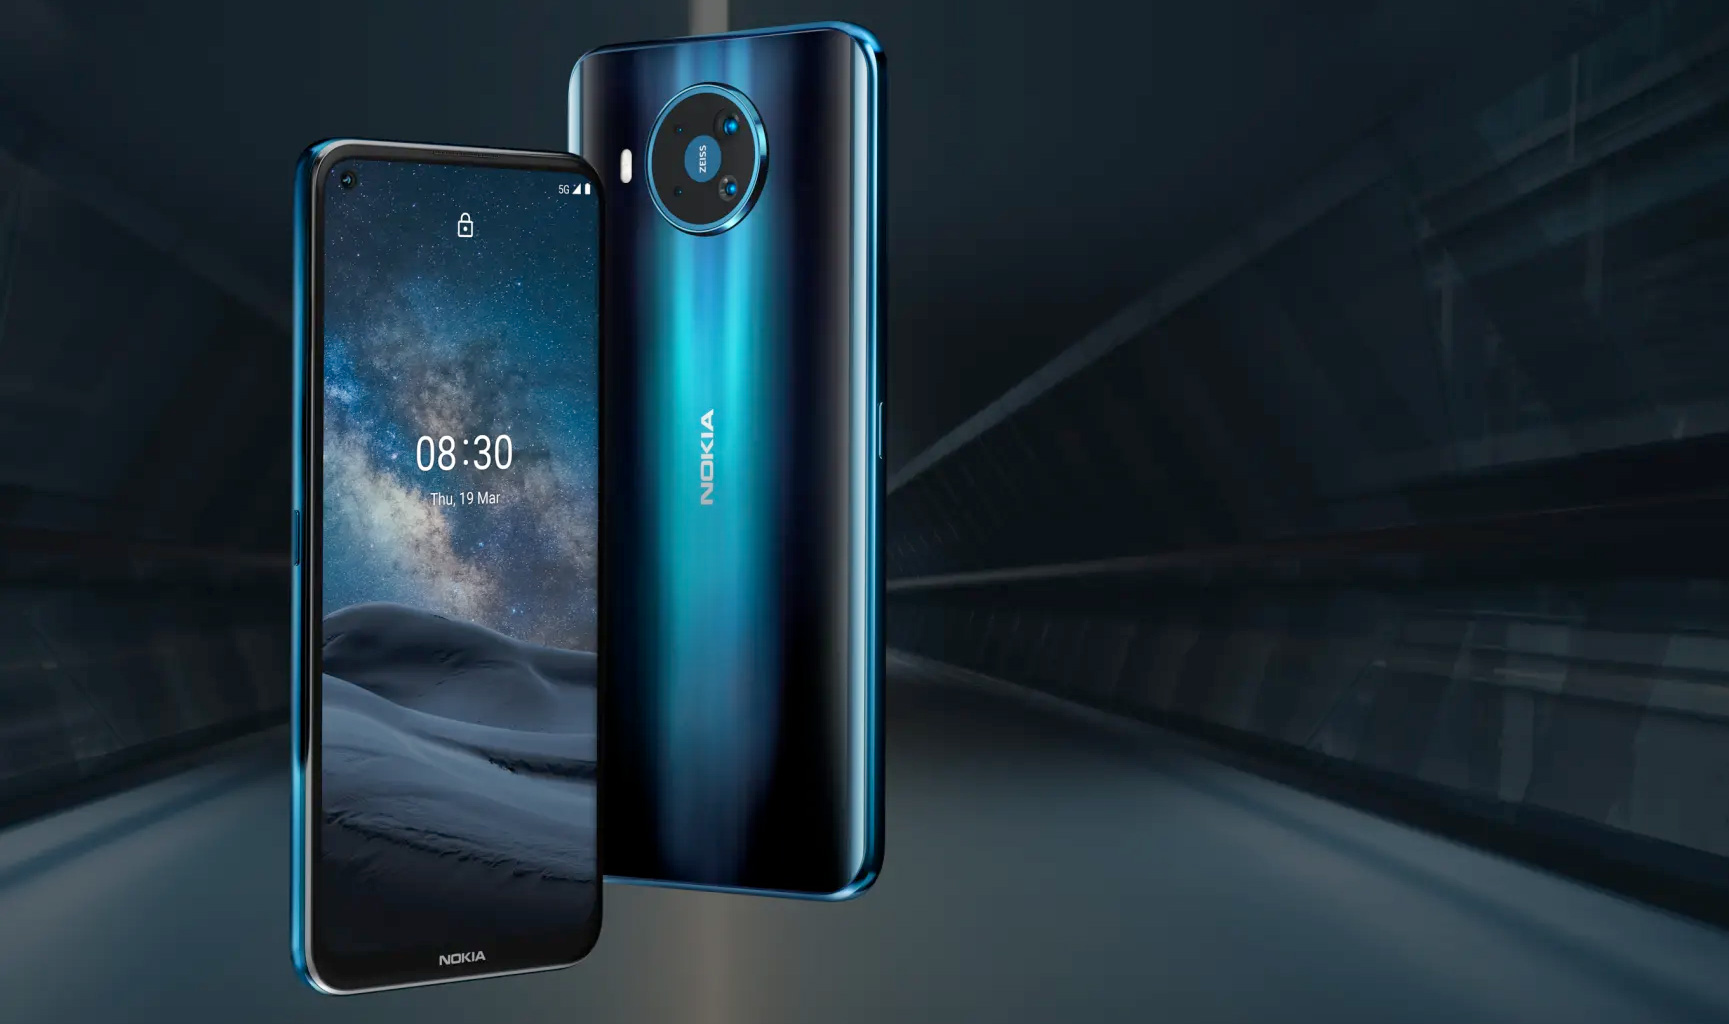 Hmd Debuts First Nokia 5g Smartphone The Nokia 8 3 5g With 4